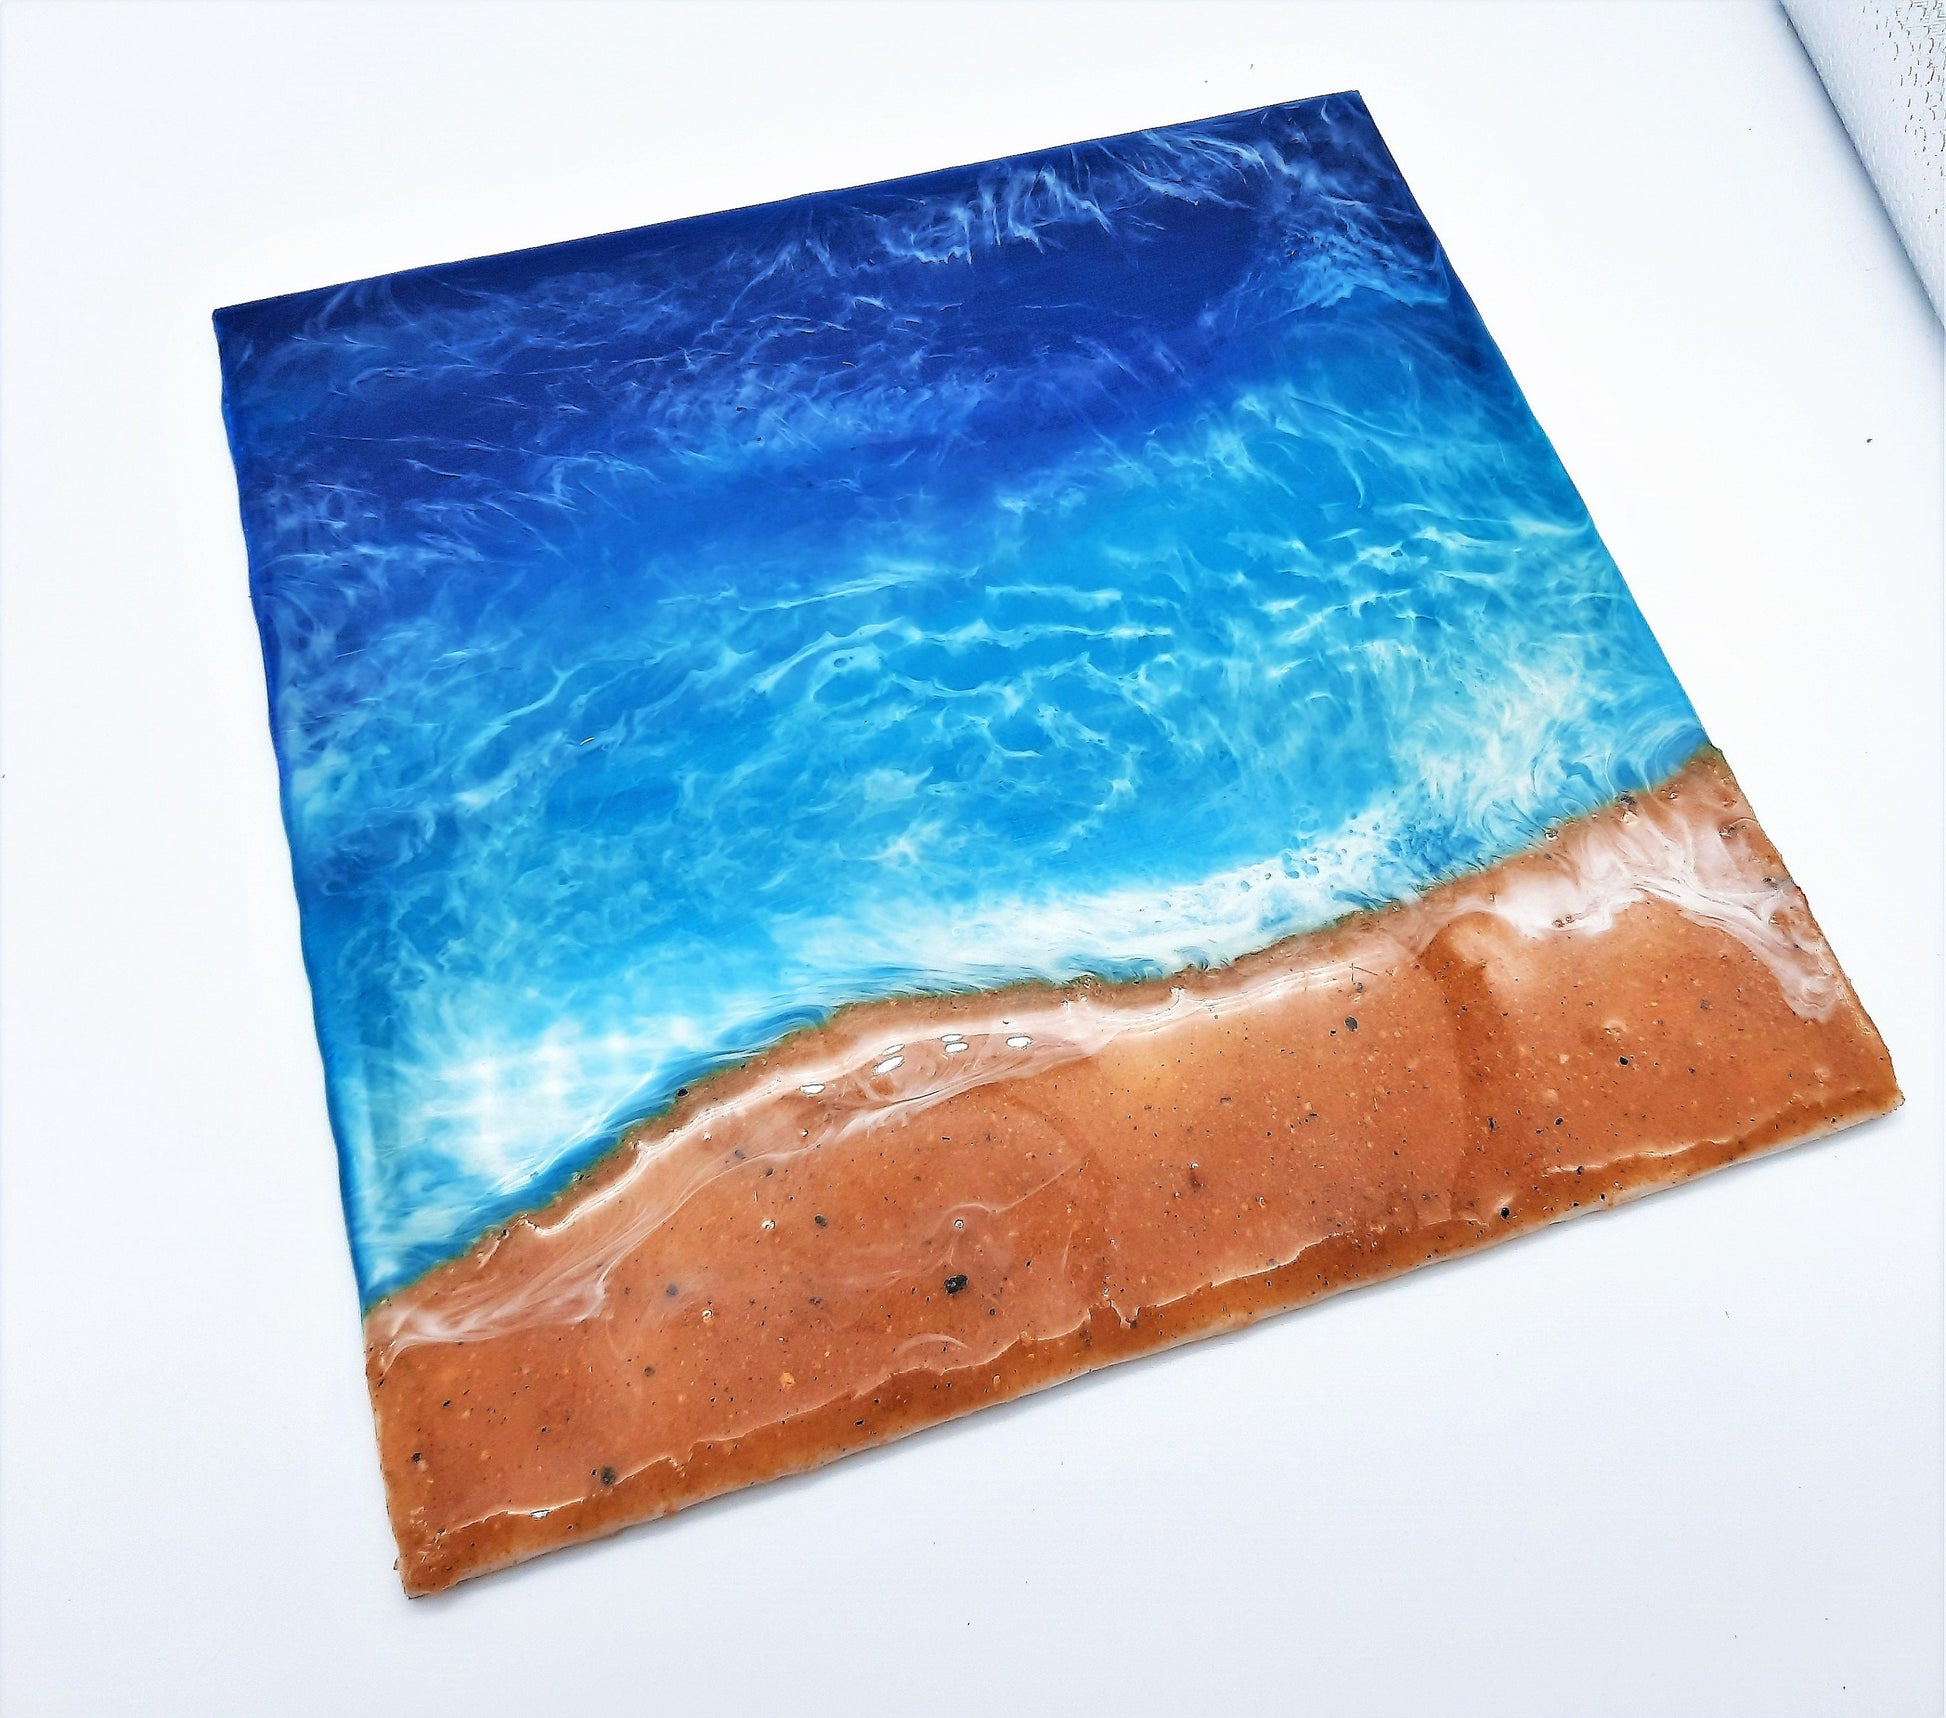 Handpainted Eco-Friendly Epoxy Resin Seascape Coastal Beach Scene, Shades of Blue, Made w/ Sand, Painted on 8" x 8" Canvas Board